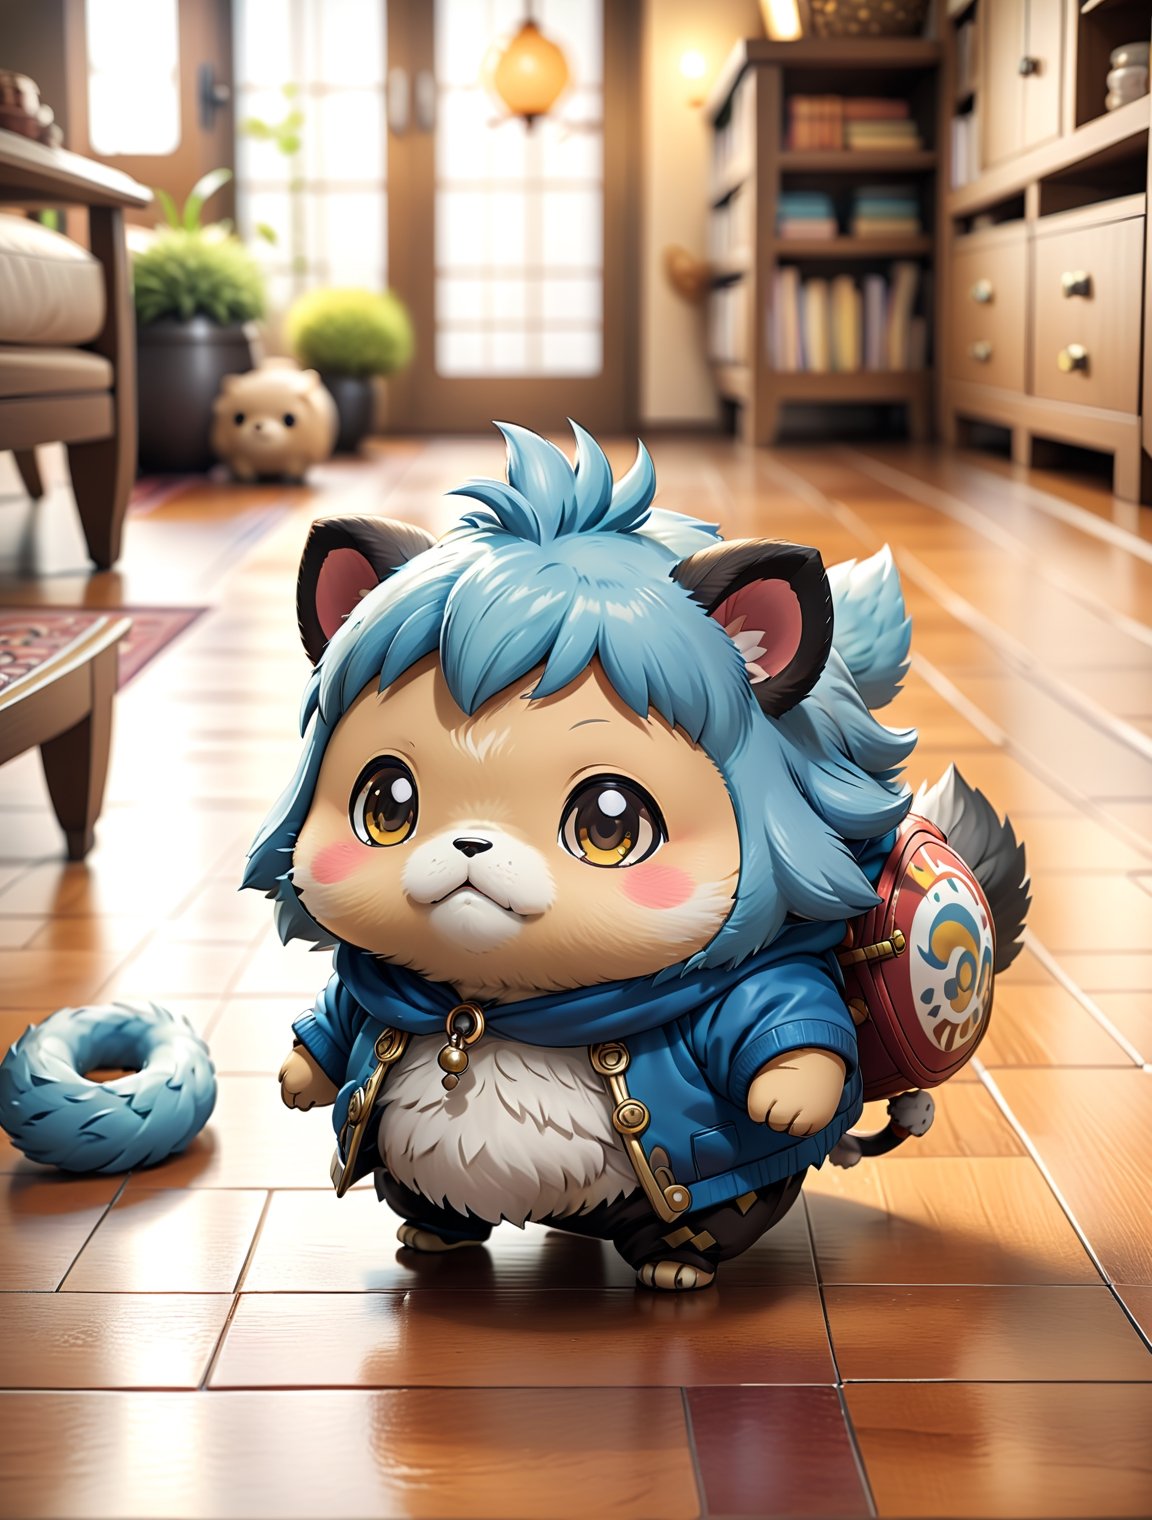 ((anime chibi style)), mythical animal walking on the floor, cozy setting, dynamic angle, depth of field, detail XL, ,fat,(anime)